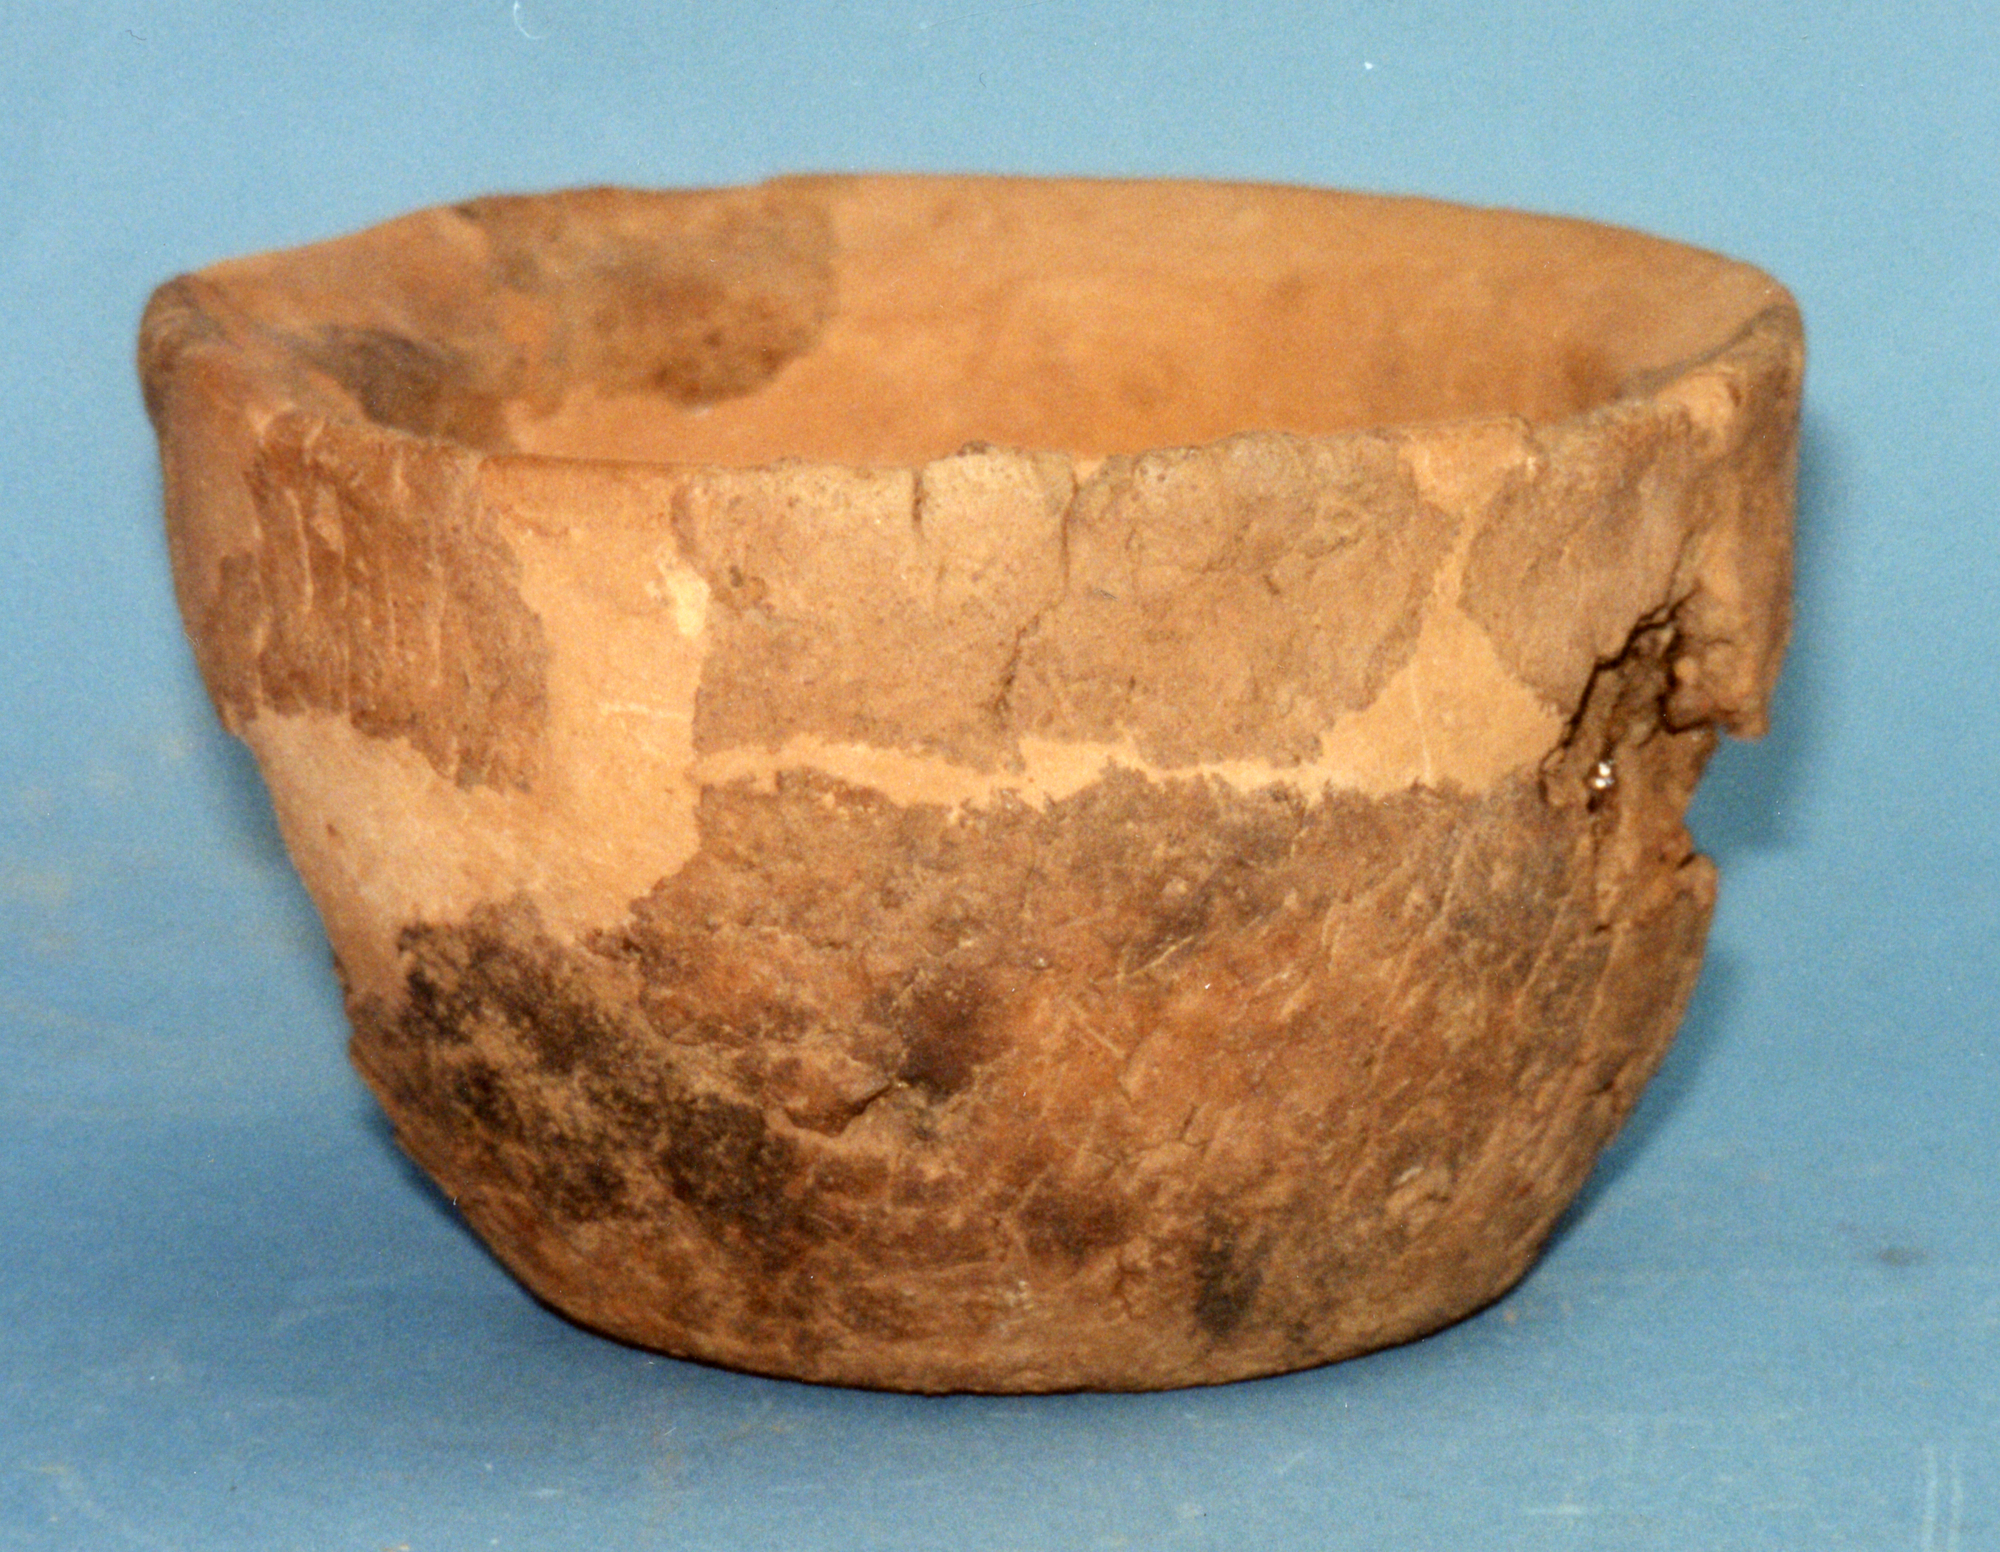 Image of Pottery food vessel, from Limefield Farm, Wiston, Lanarkshire © National Museums Scotland